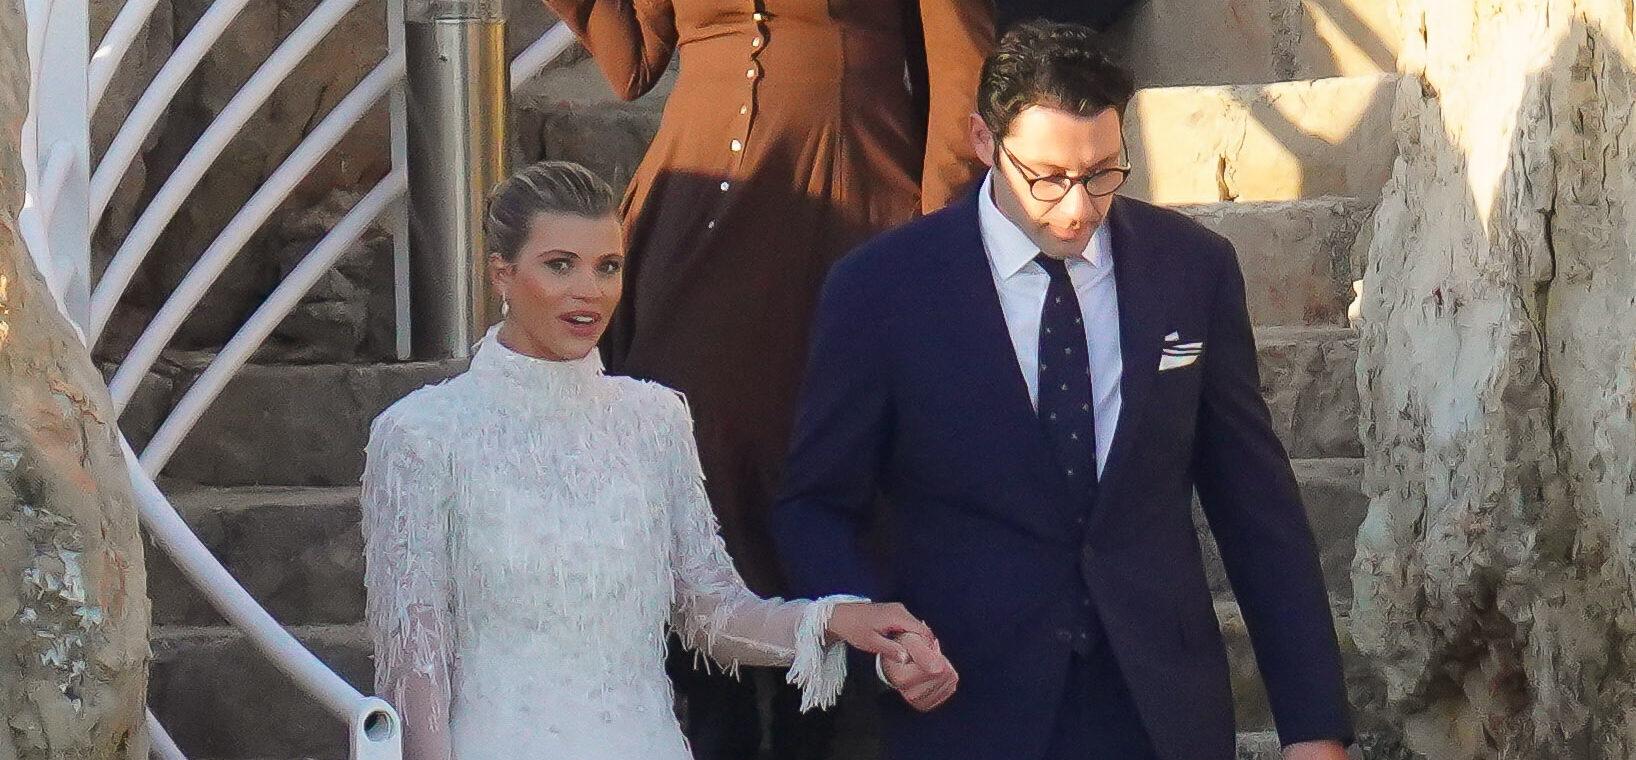 Sofia Richie Is Getting Married This Weekend, Family Spotted In South Of France